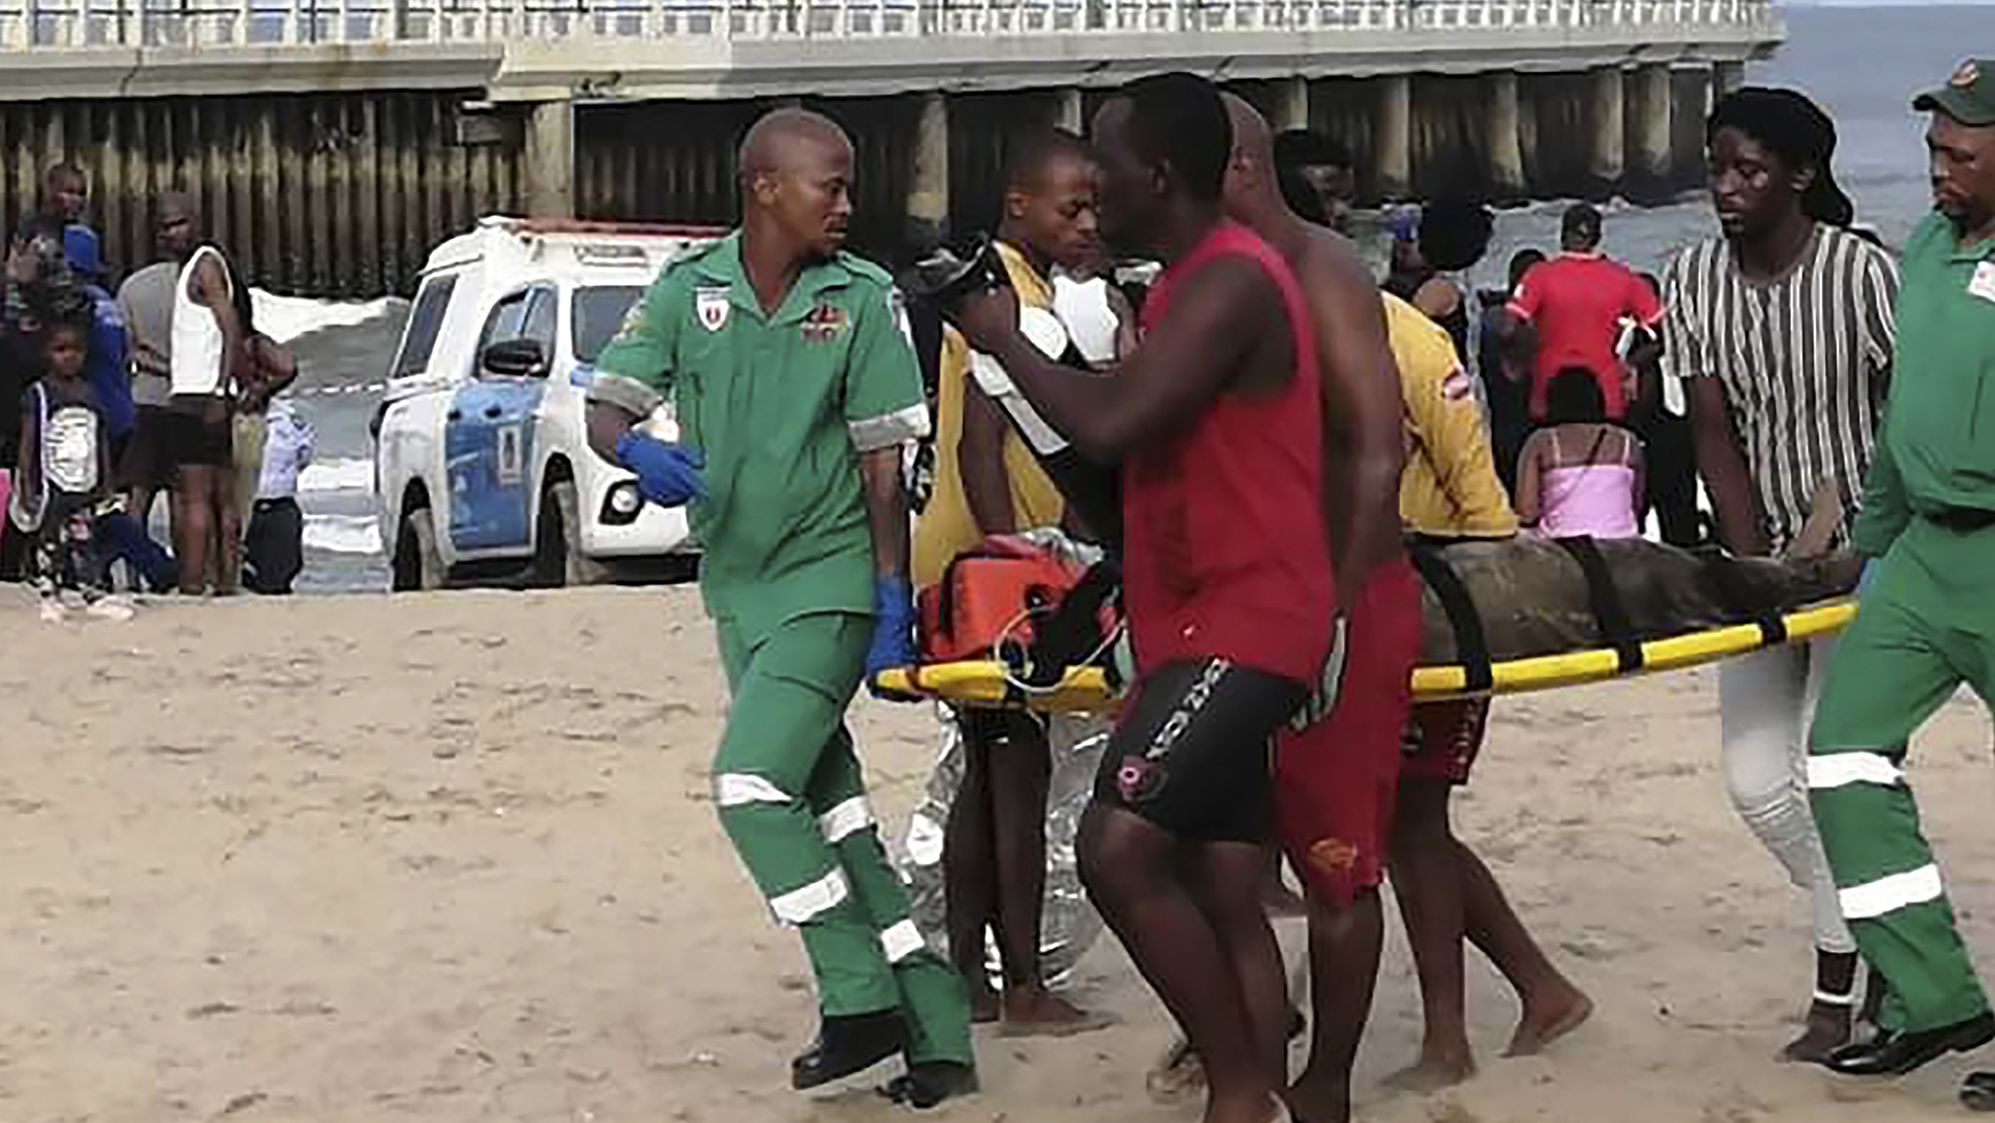 Paramedics attended to more than 100 people at the scene in Durban, South Africa on Saturday, December 17, 2022.